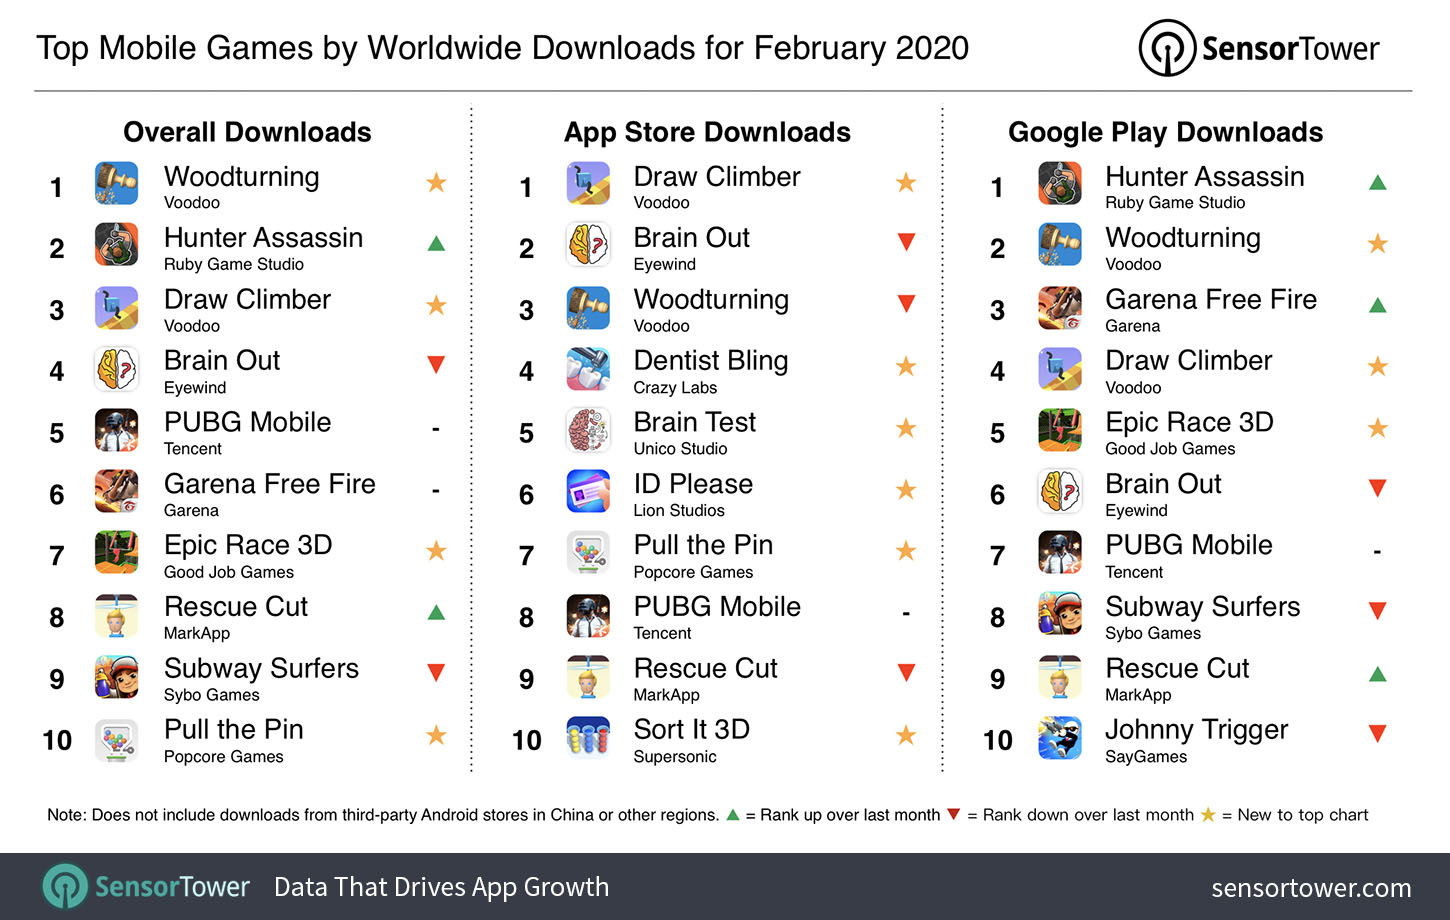 Top Mobile Games Worldwide for February 2020 by Downloads